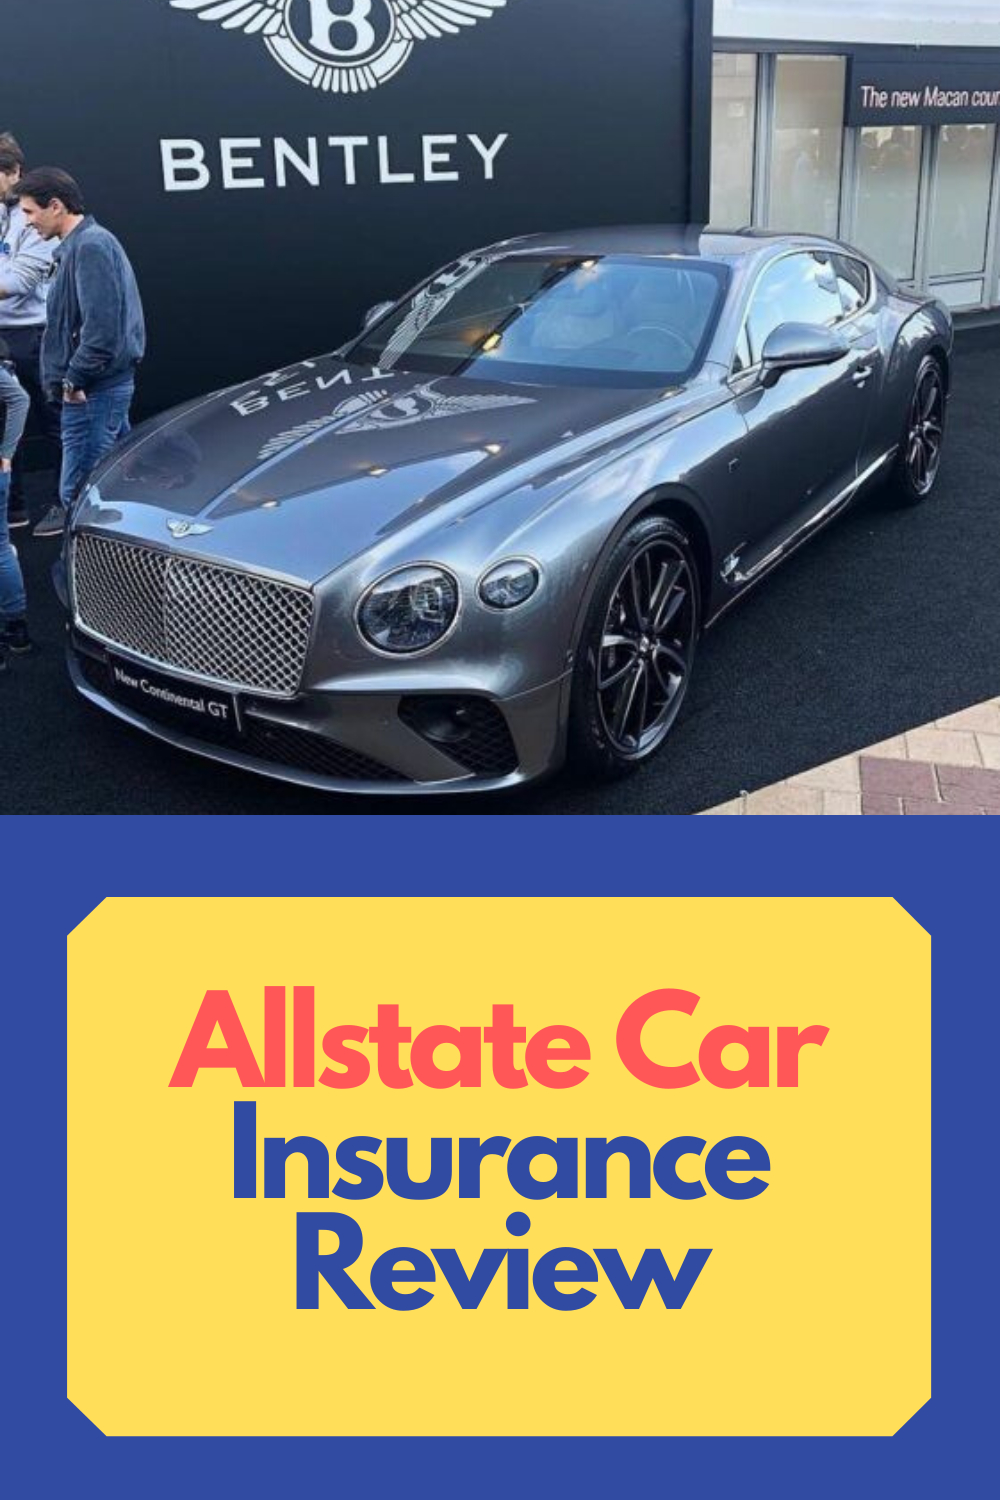 Allstate Car Insurance Review throughout size 1000 X 1500